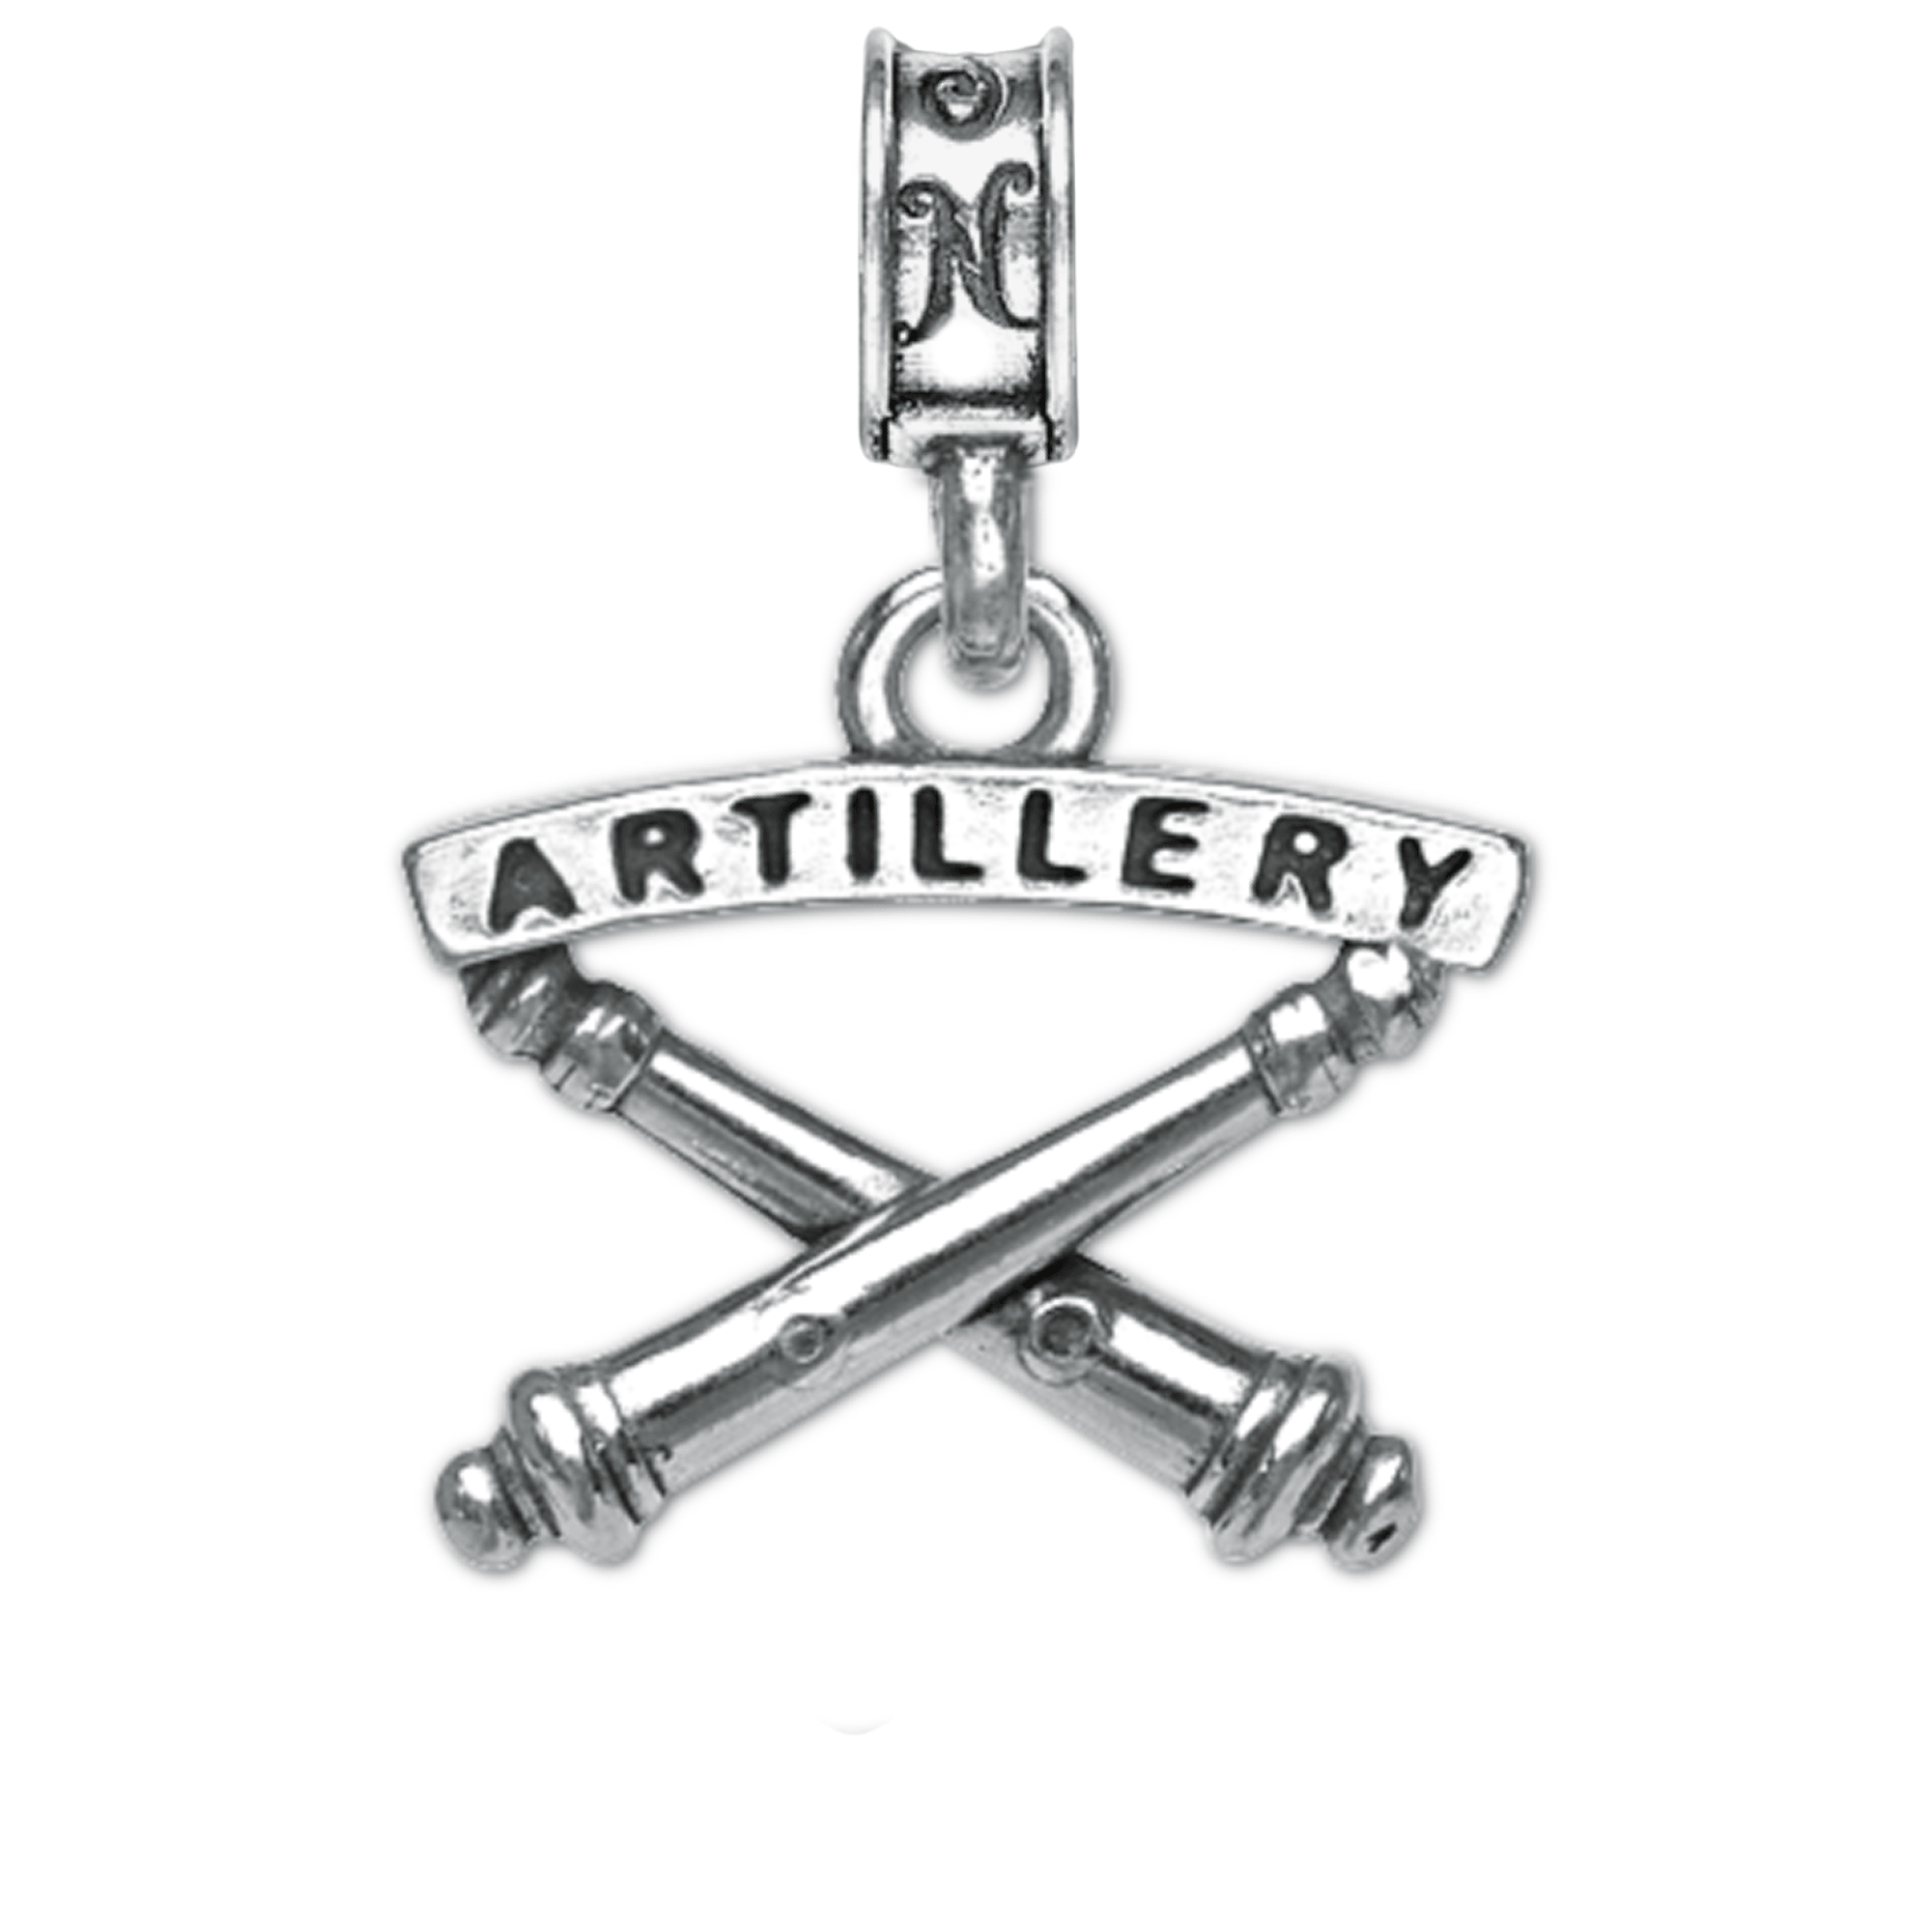 Military Jewelry, Military Charms, Marine Corps, USMC, Military Gifts, Artillery Badge Charm